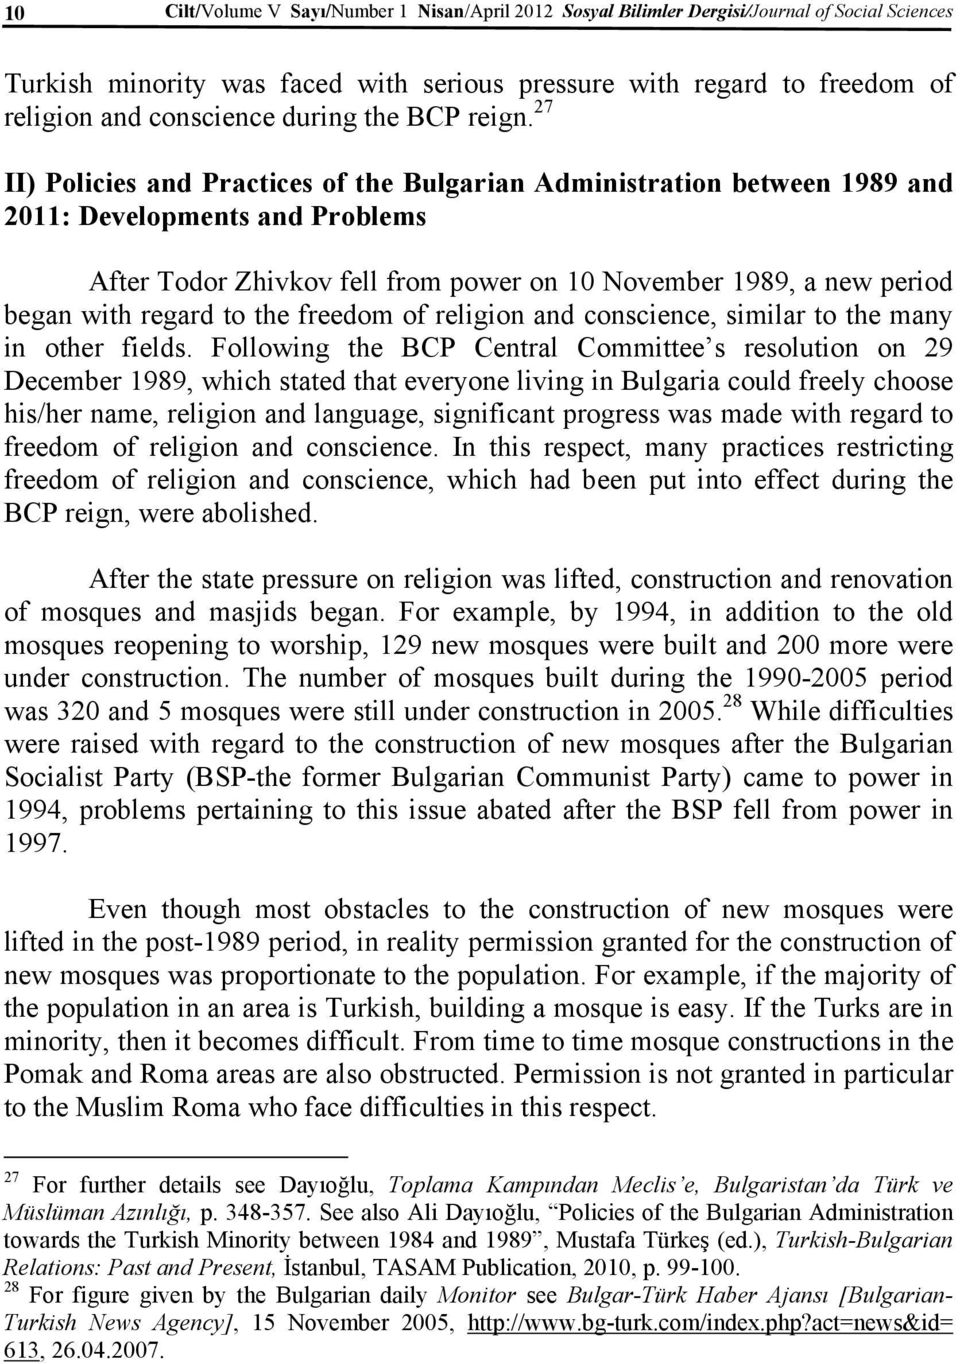 27 II) Policies and Practices of the Bulgarian Administration between 1989 and 2011: Developments and Problems After Todor Zhivkov fell from power on 10 November 1989, a new period began with regard